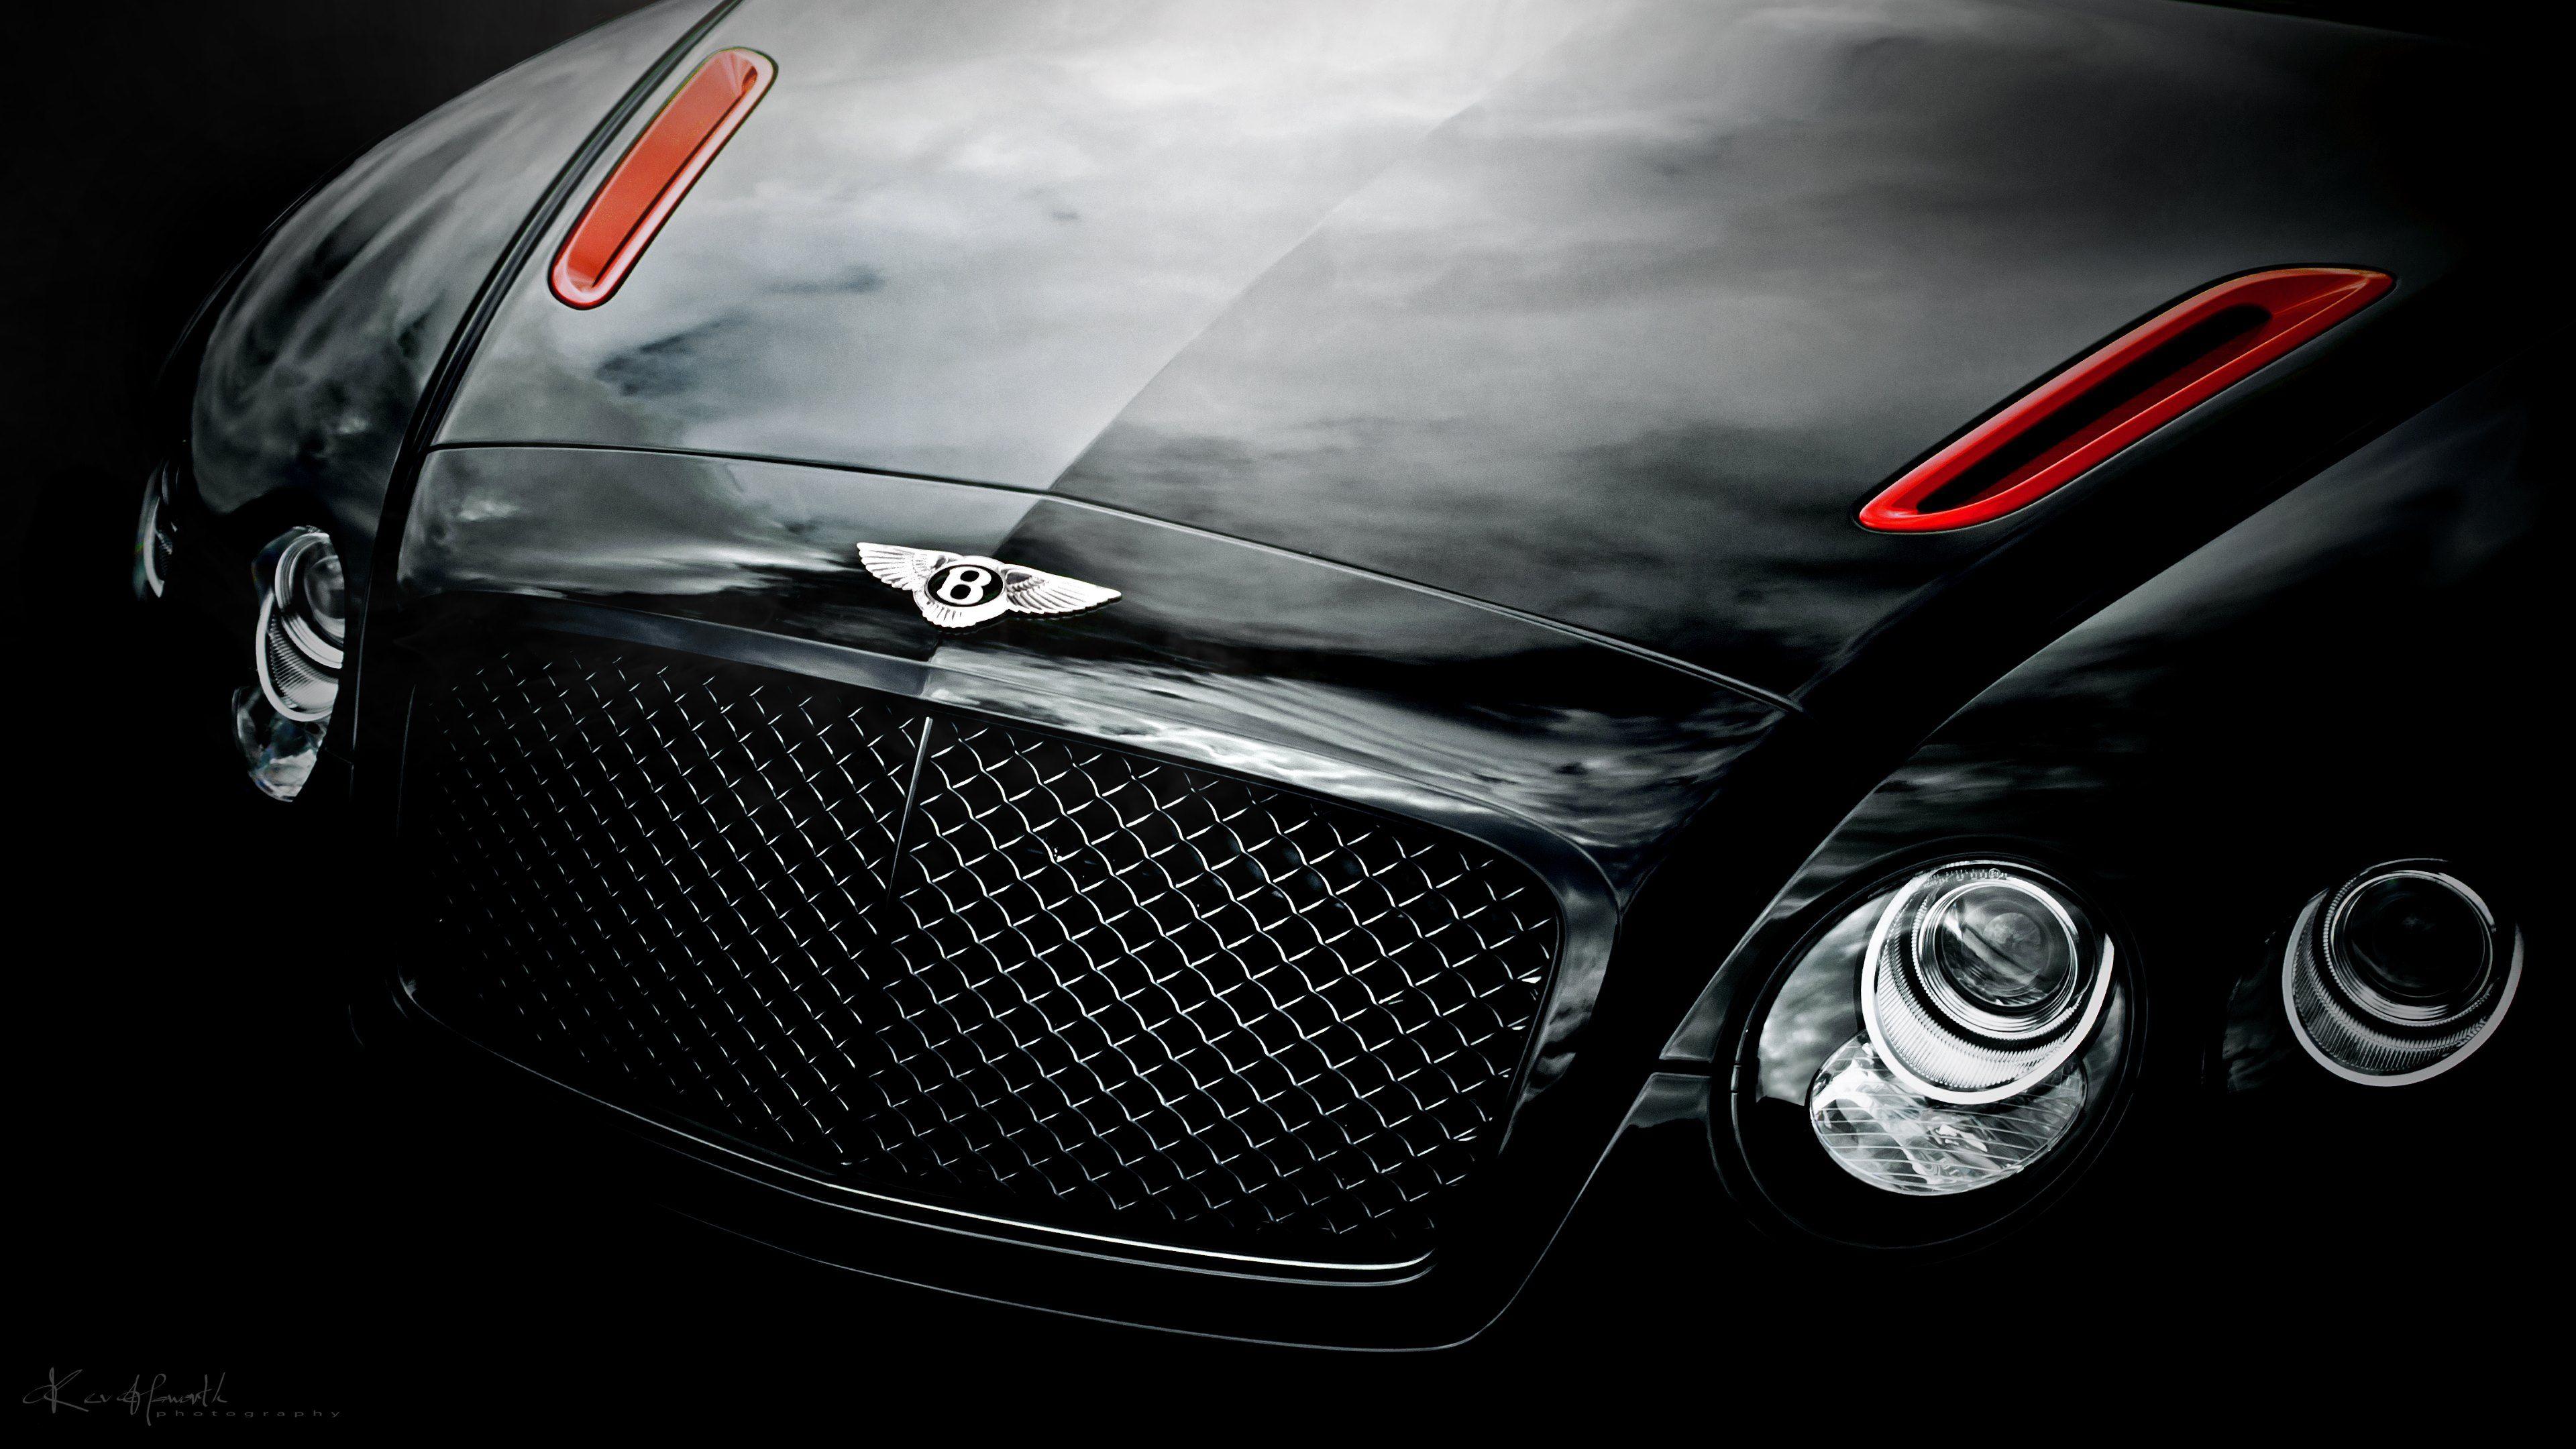 Bentley Continental GT Wallpaper, Picture, Image